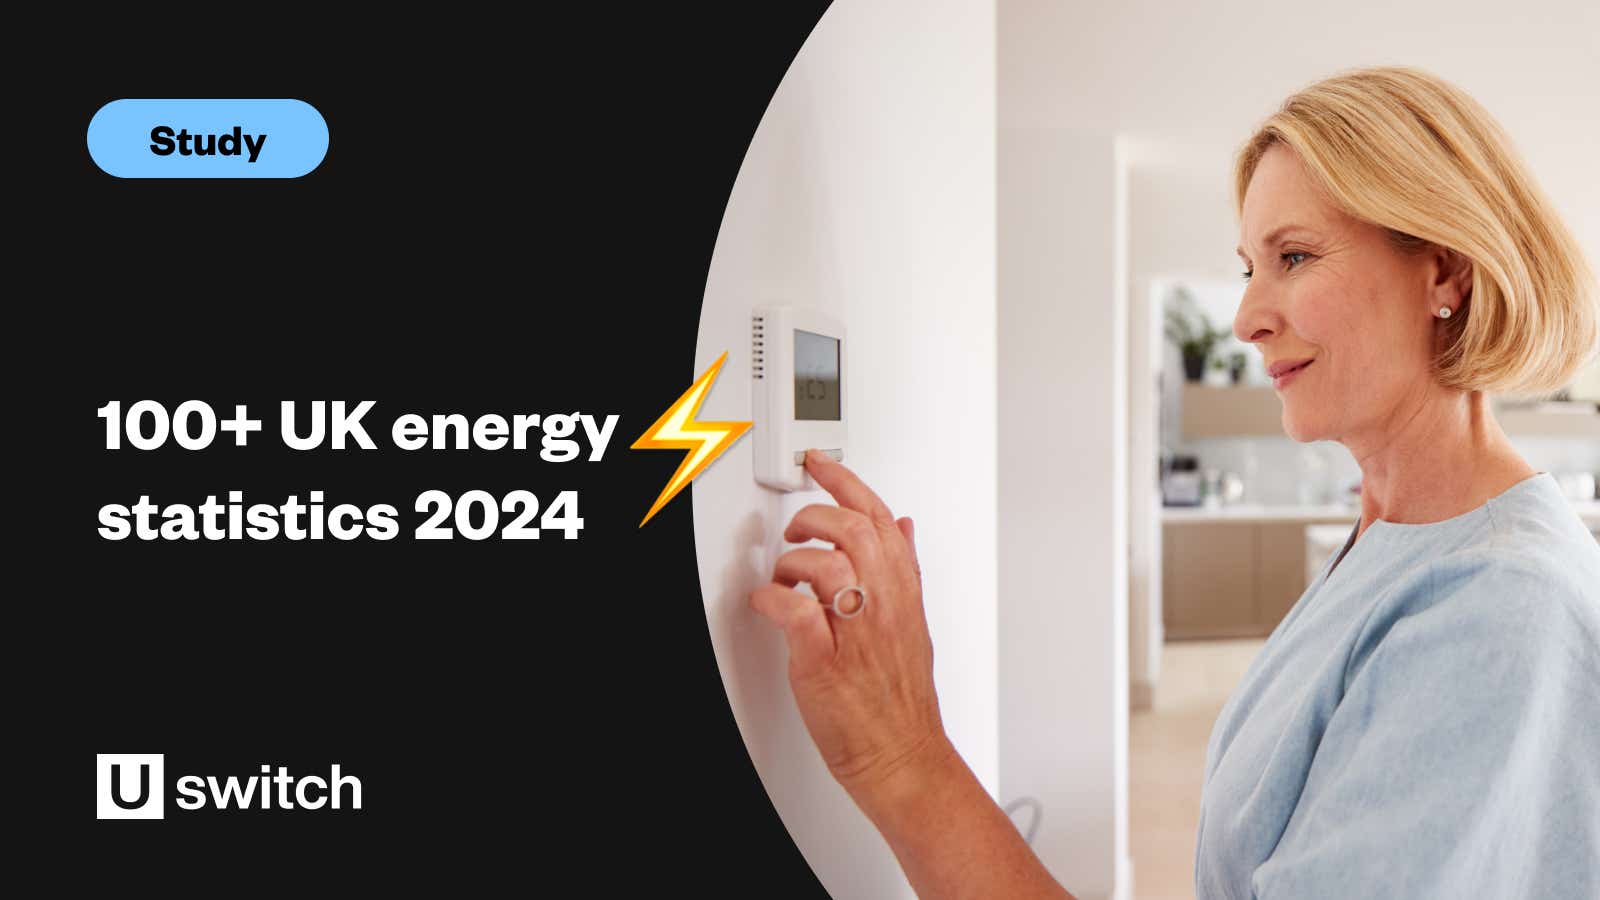 Feature image showing an image of a lightbulb alongside the title '100+ UK Energy Statistics 2024